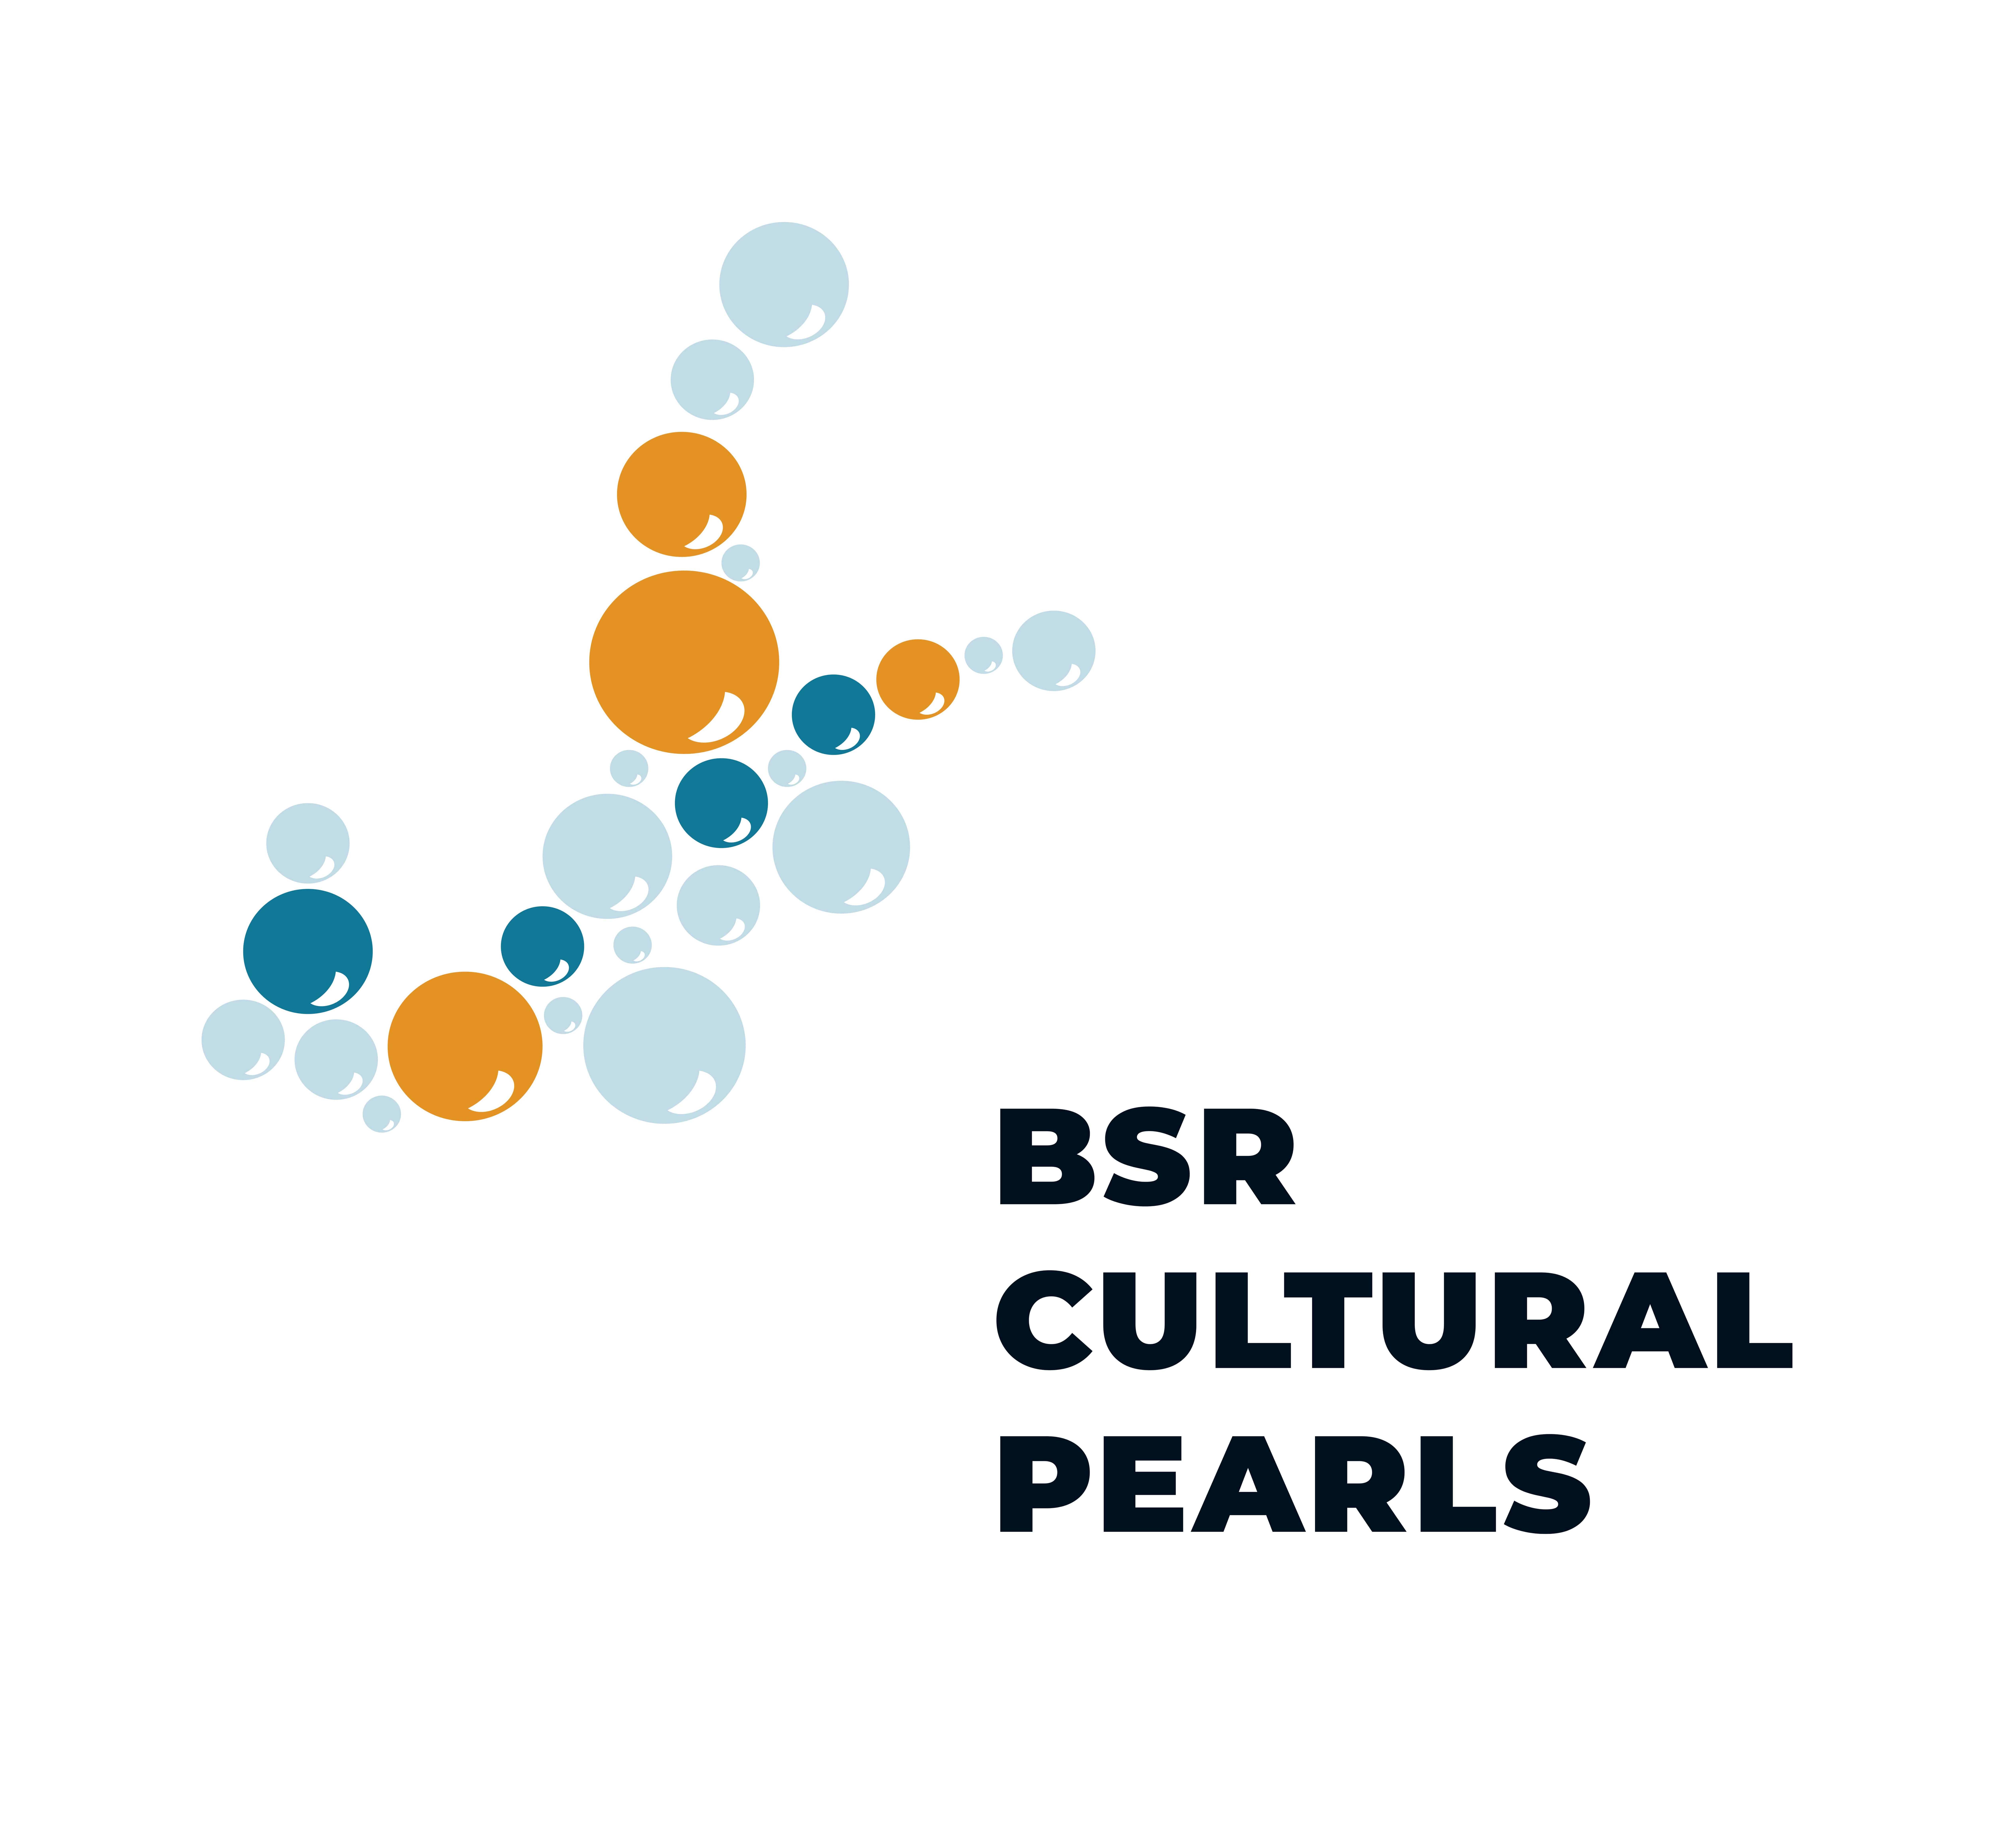 BSR Cultural Pearls: Strengthening social resilience by tapping into the potential of culture